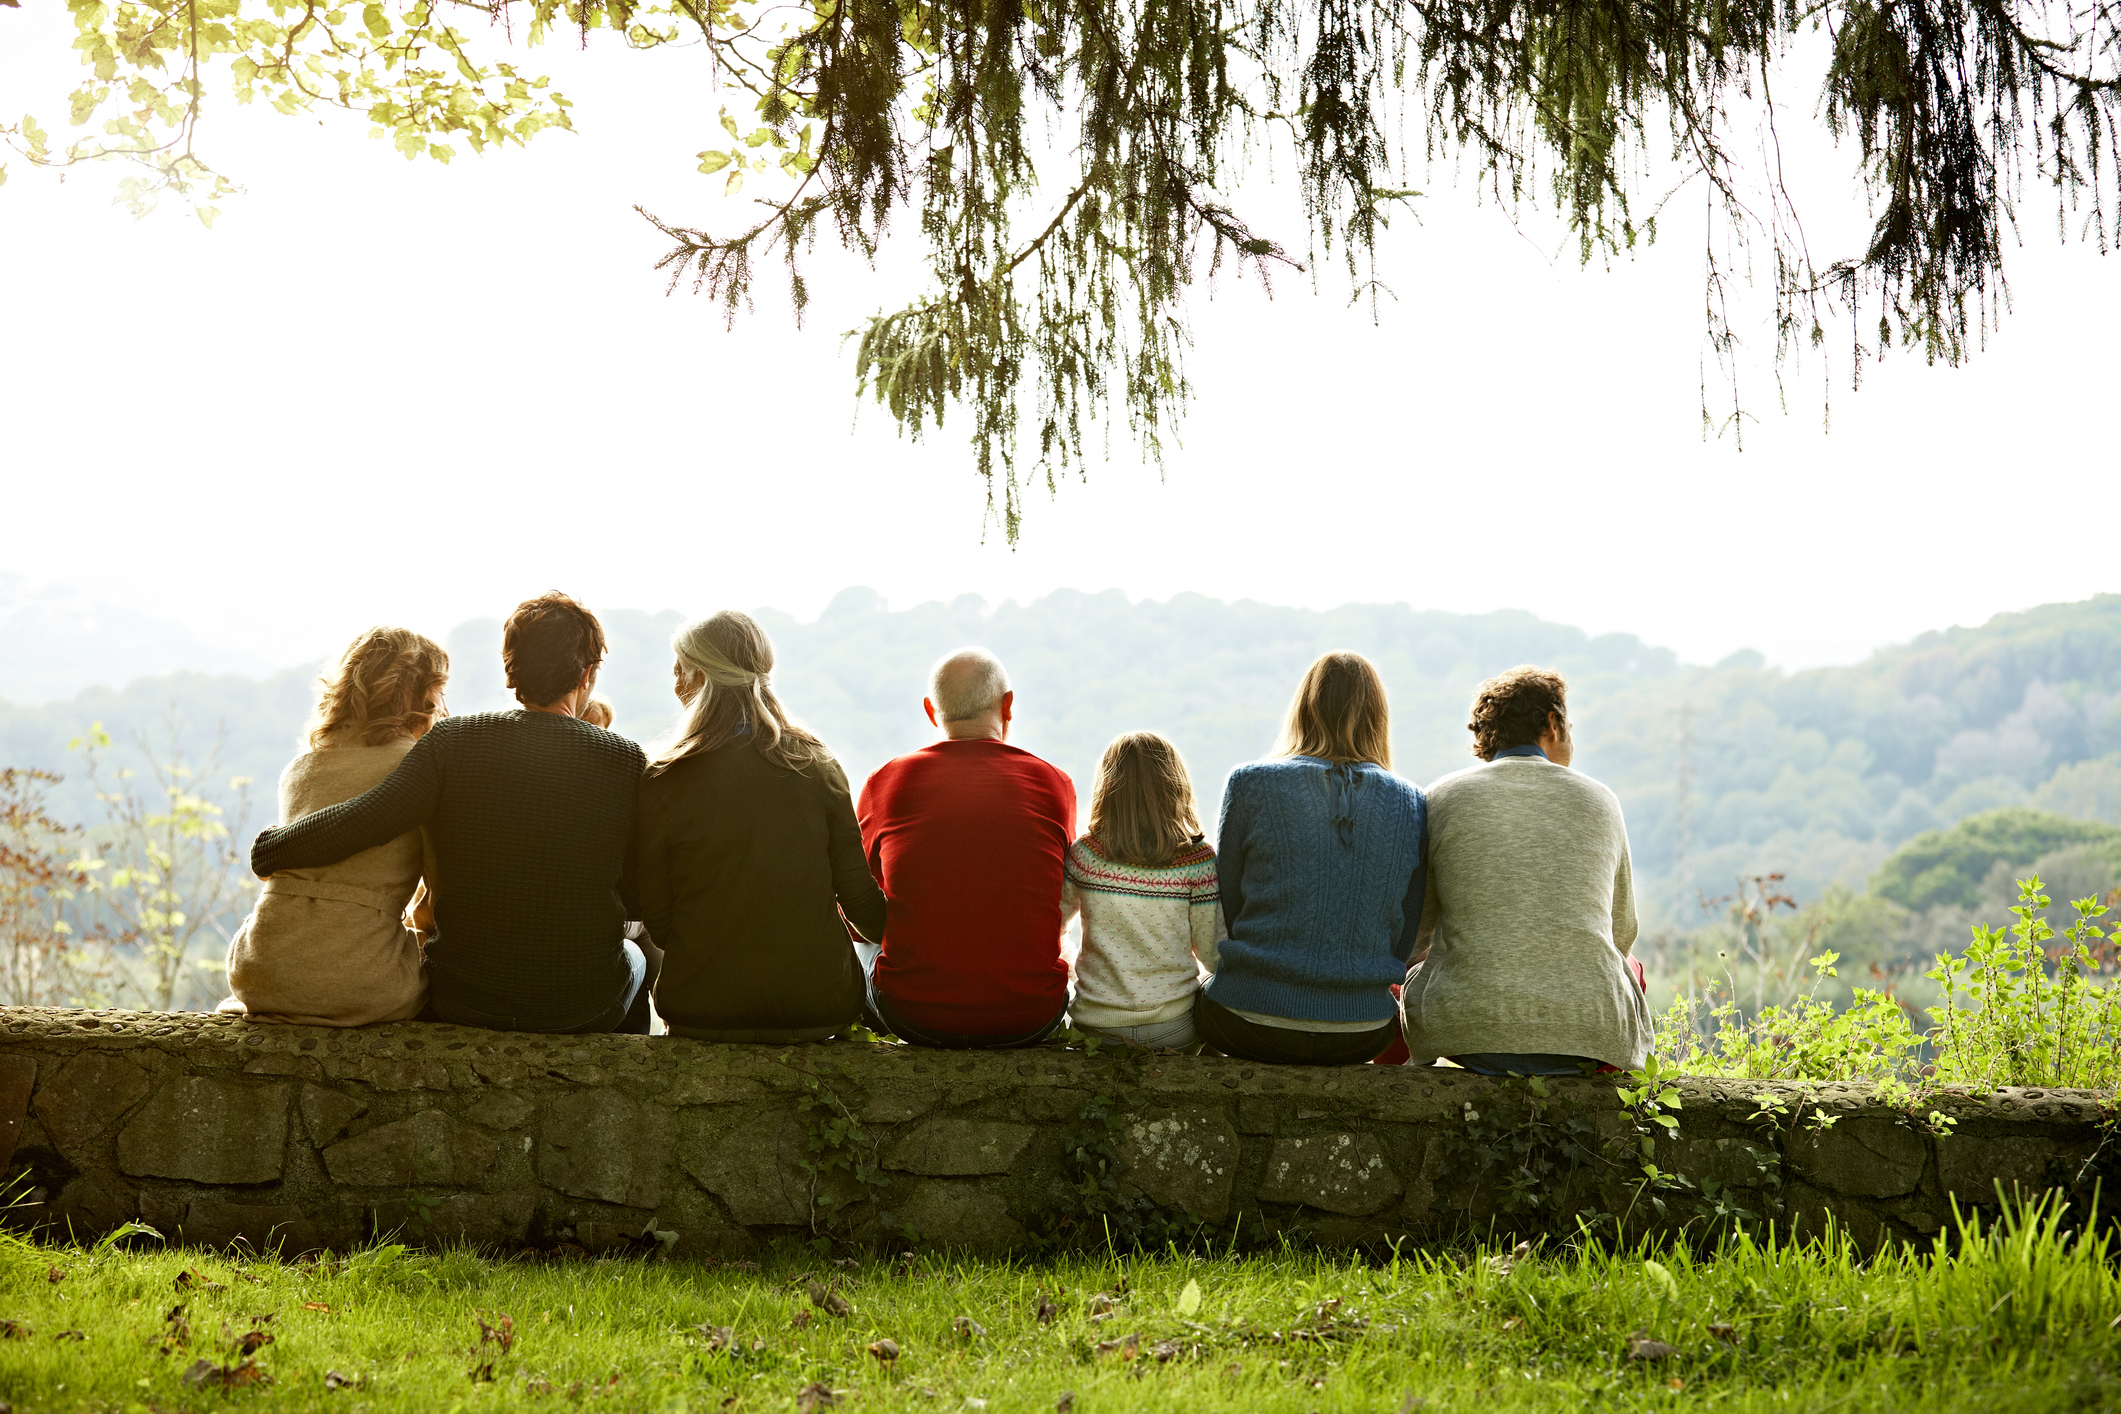 Seven people sitting on a wall, facing a lush landscape, enjoying a serene moment together